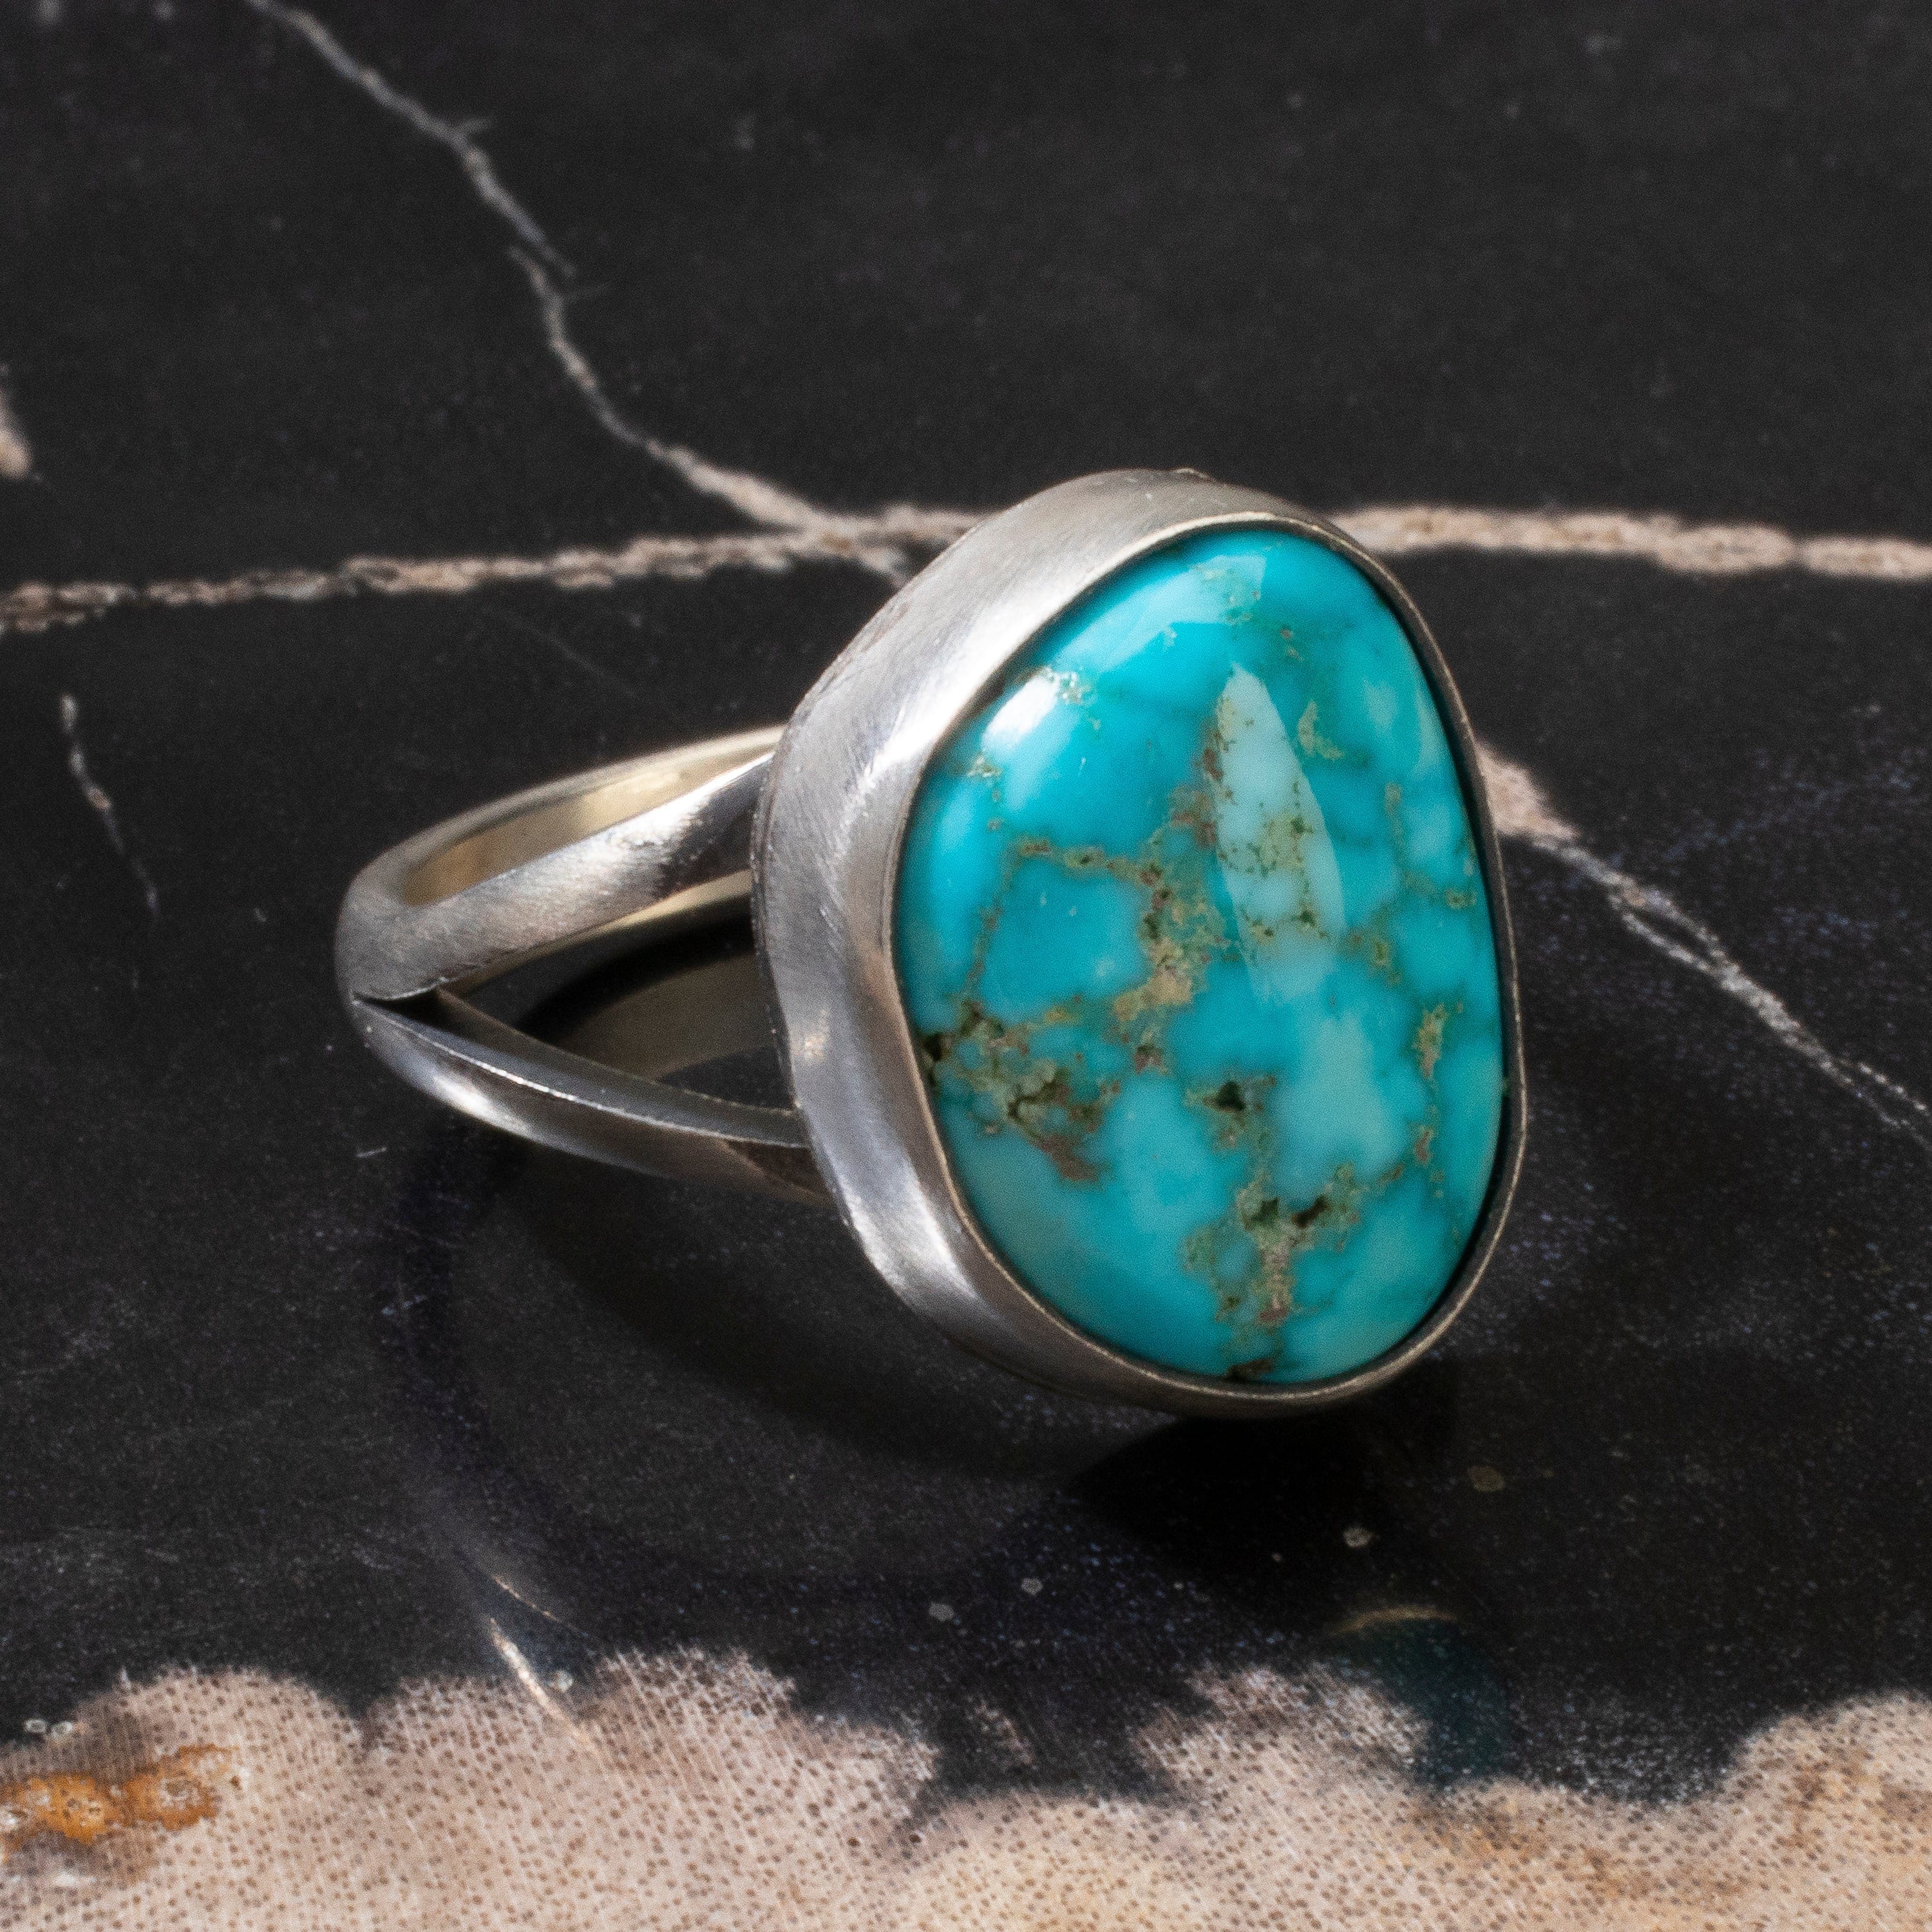 Kalifano Native American Jewelry 8 Scott Skeets Blue Ridge Turquoise USA Native American Made 925 Sterling Silver Ring NAR500.099.8